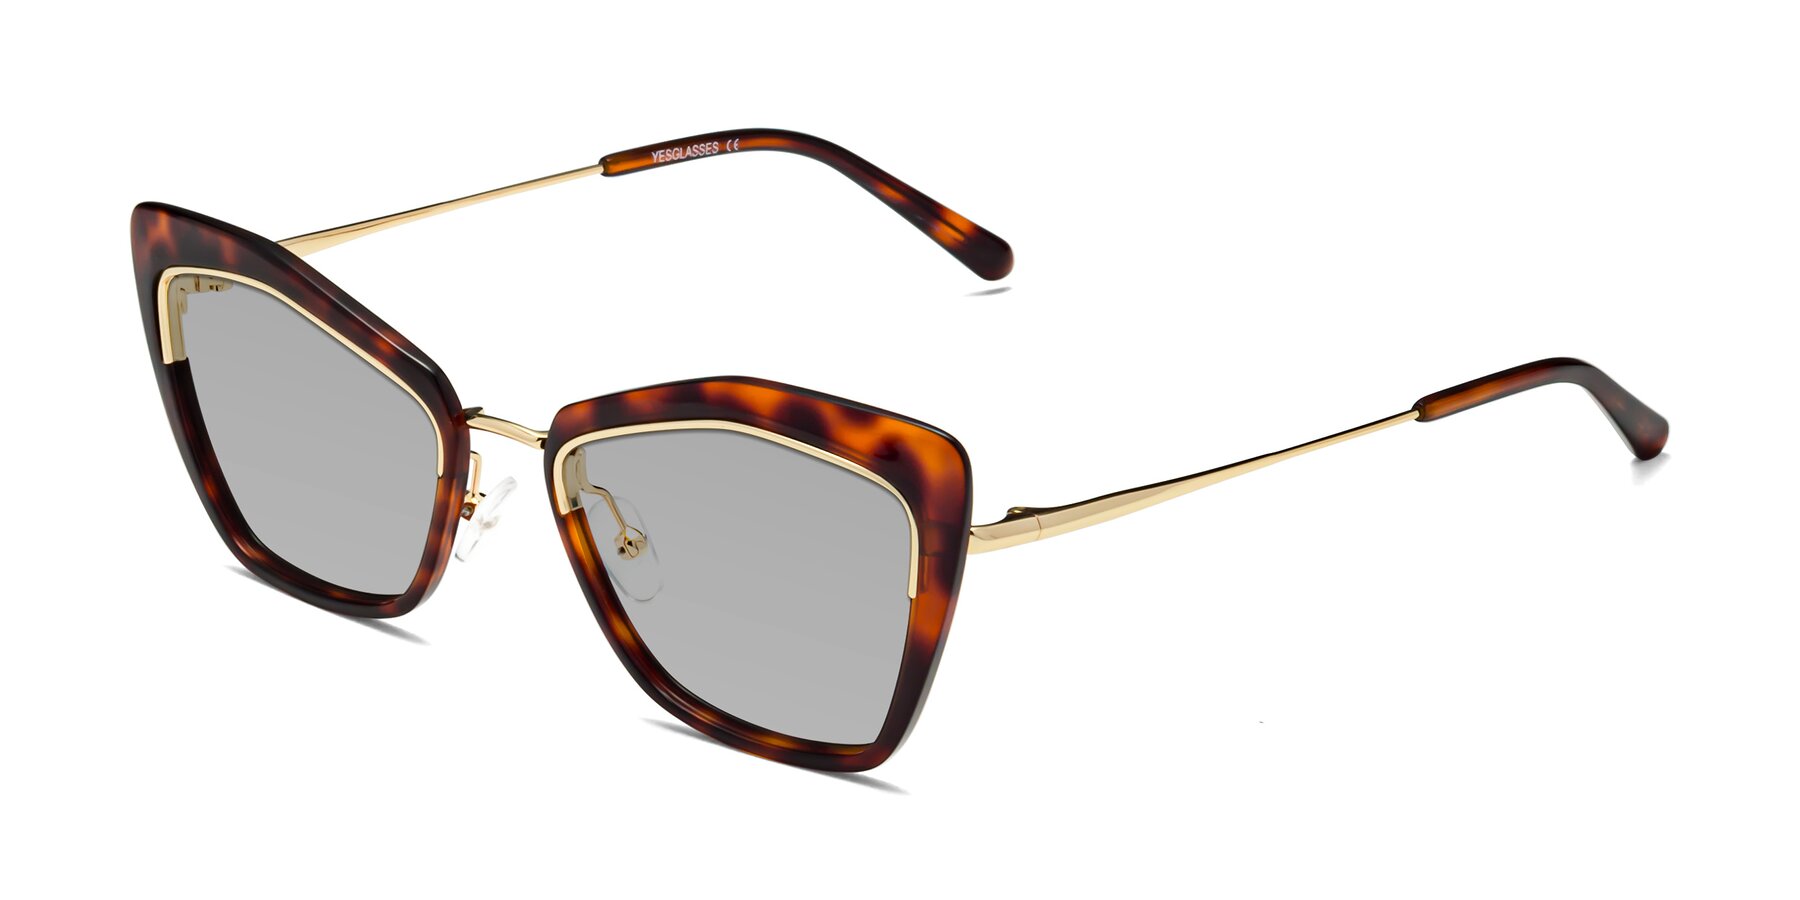 Angle of Lasso in Light Tortoise with Light Gray Tinted Lenses